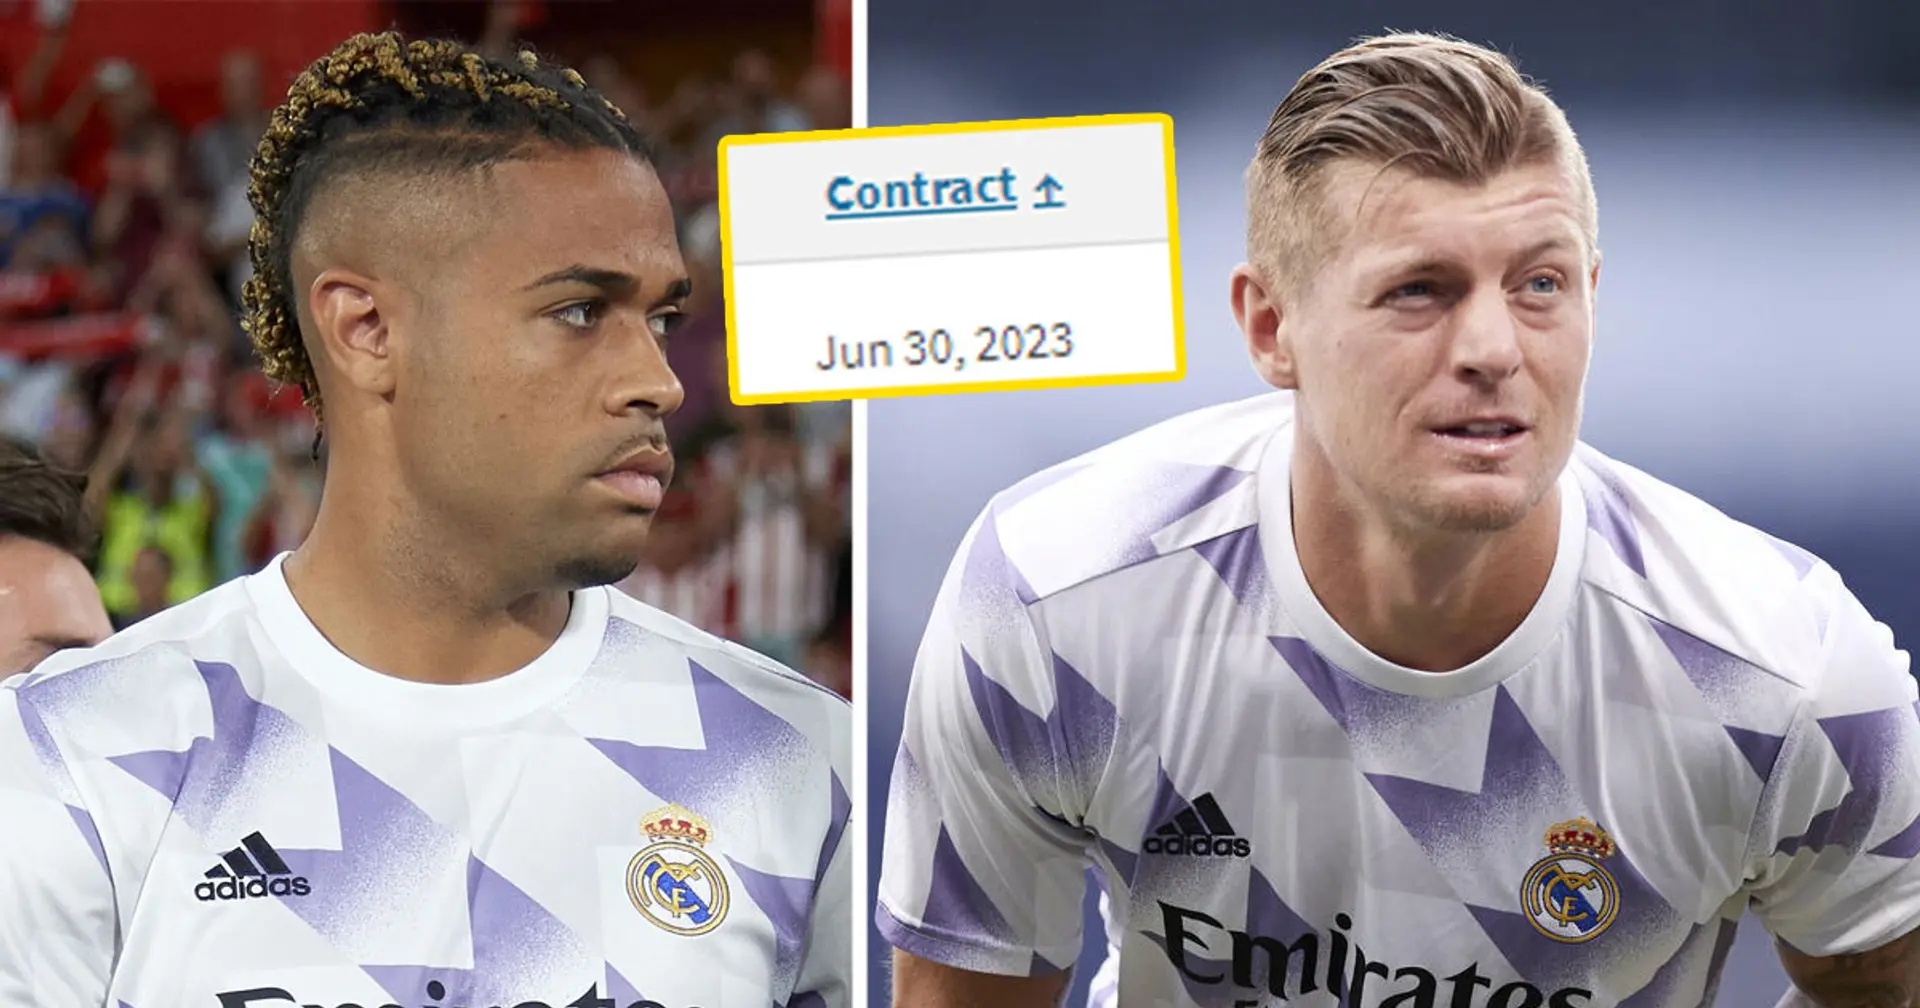 7 Madrid players free to start negotiations with other clubs from today - we name them